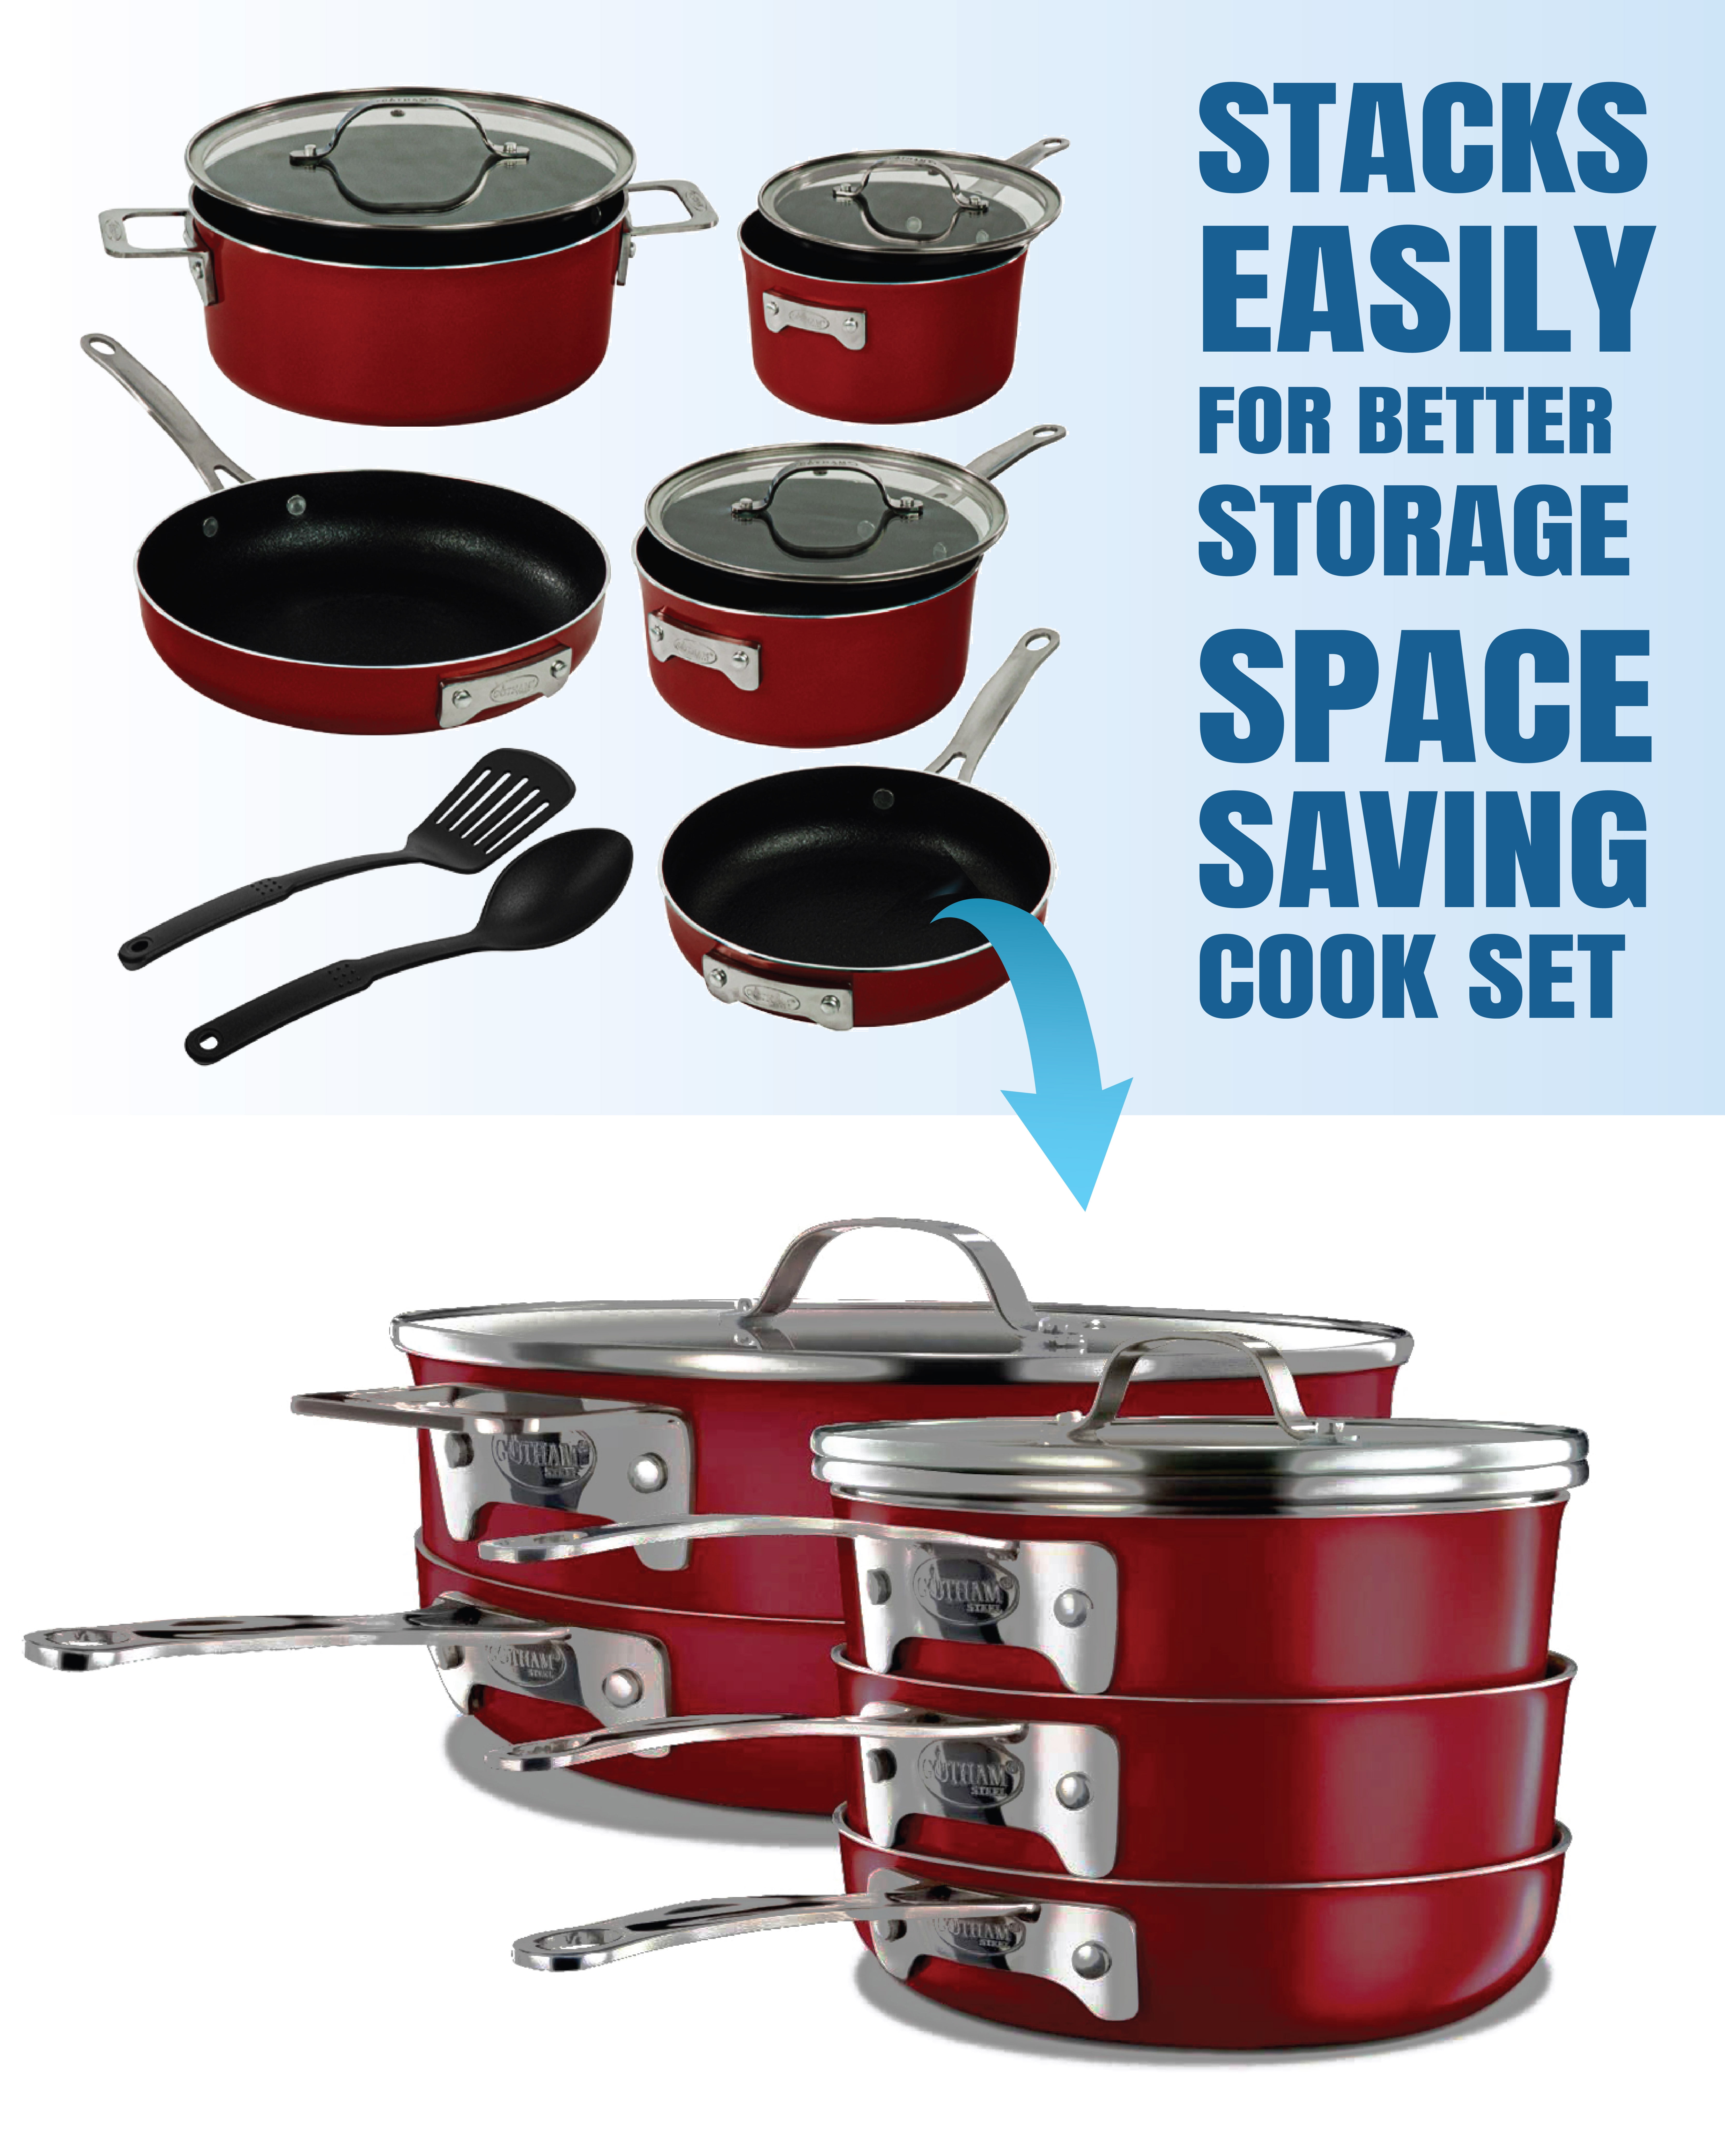  Gotham Steel STACKMASTER Pots Stackable 10 Piece Cookware Set  Ultra Nonstick Cast Texture Coating Includes Fry Pans, Red : Everything Else